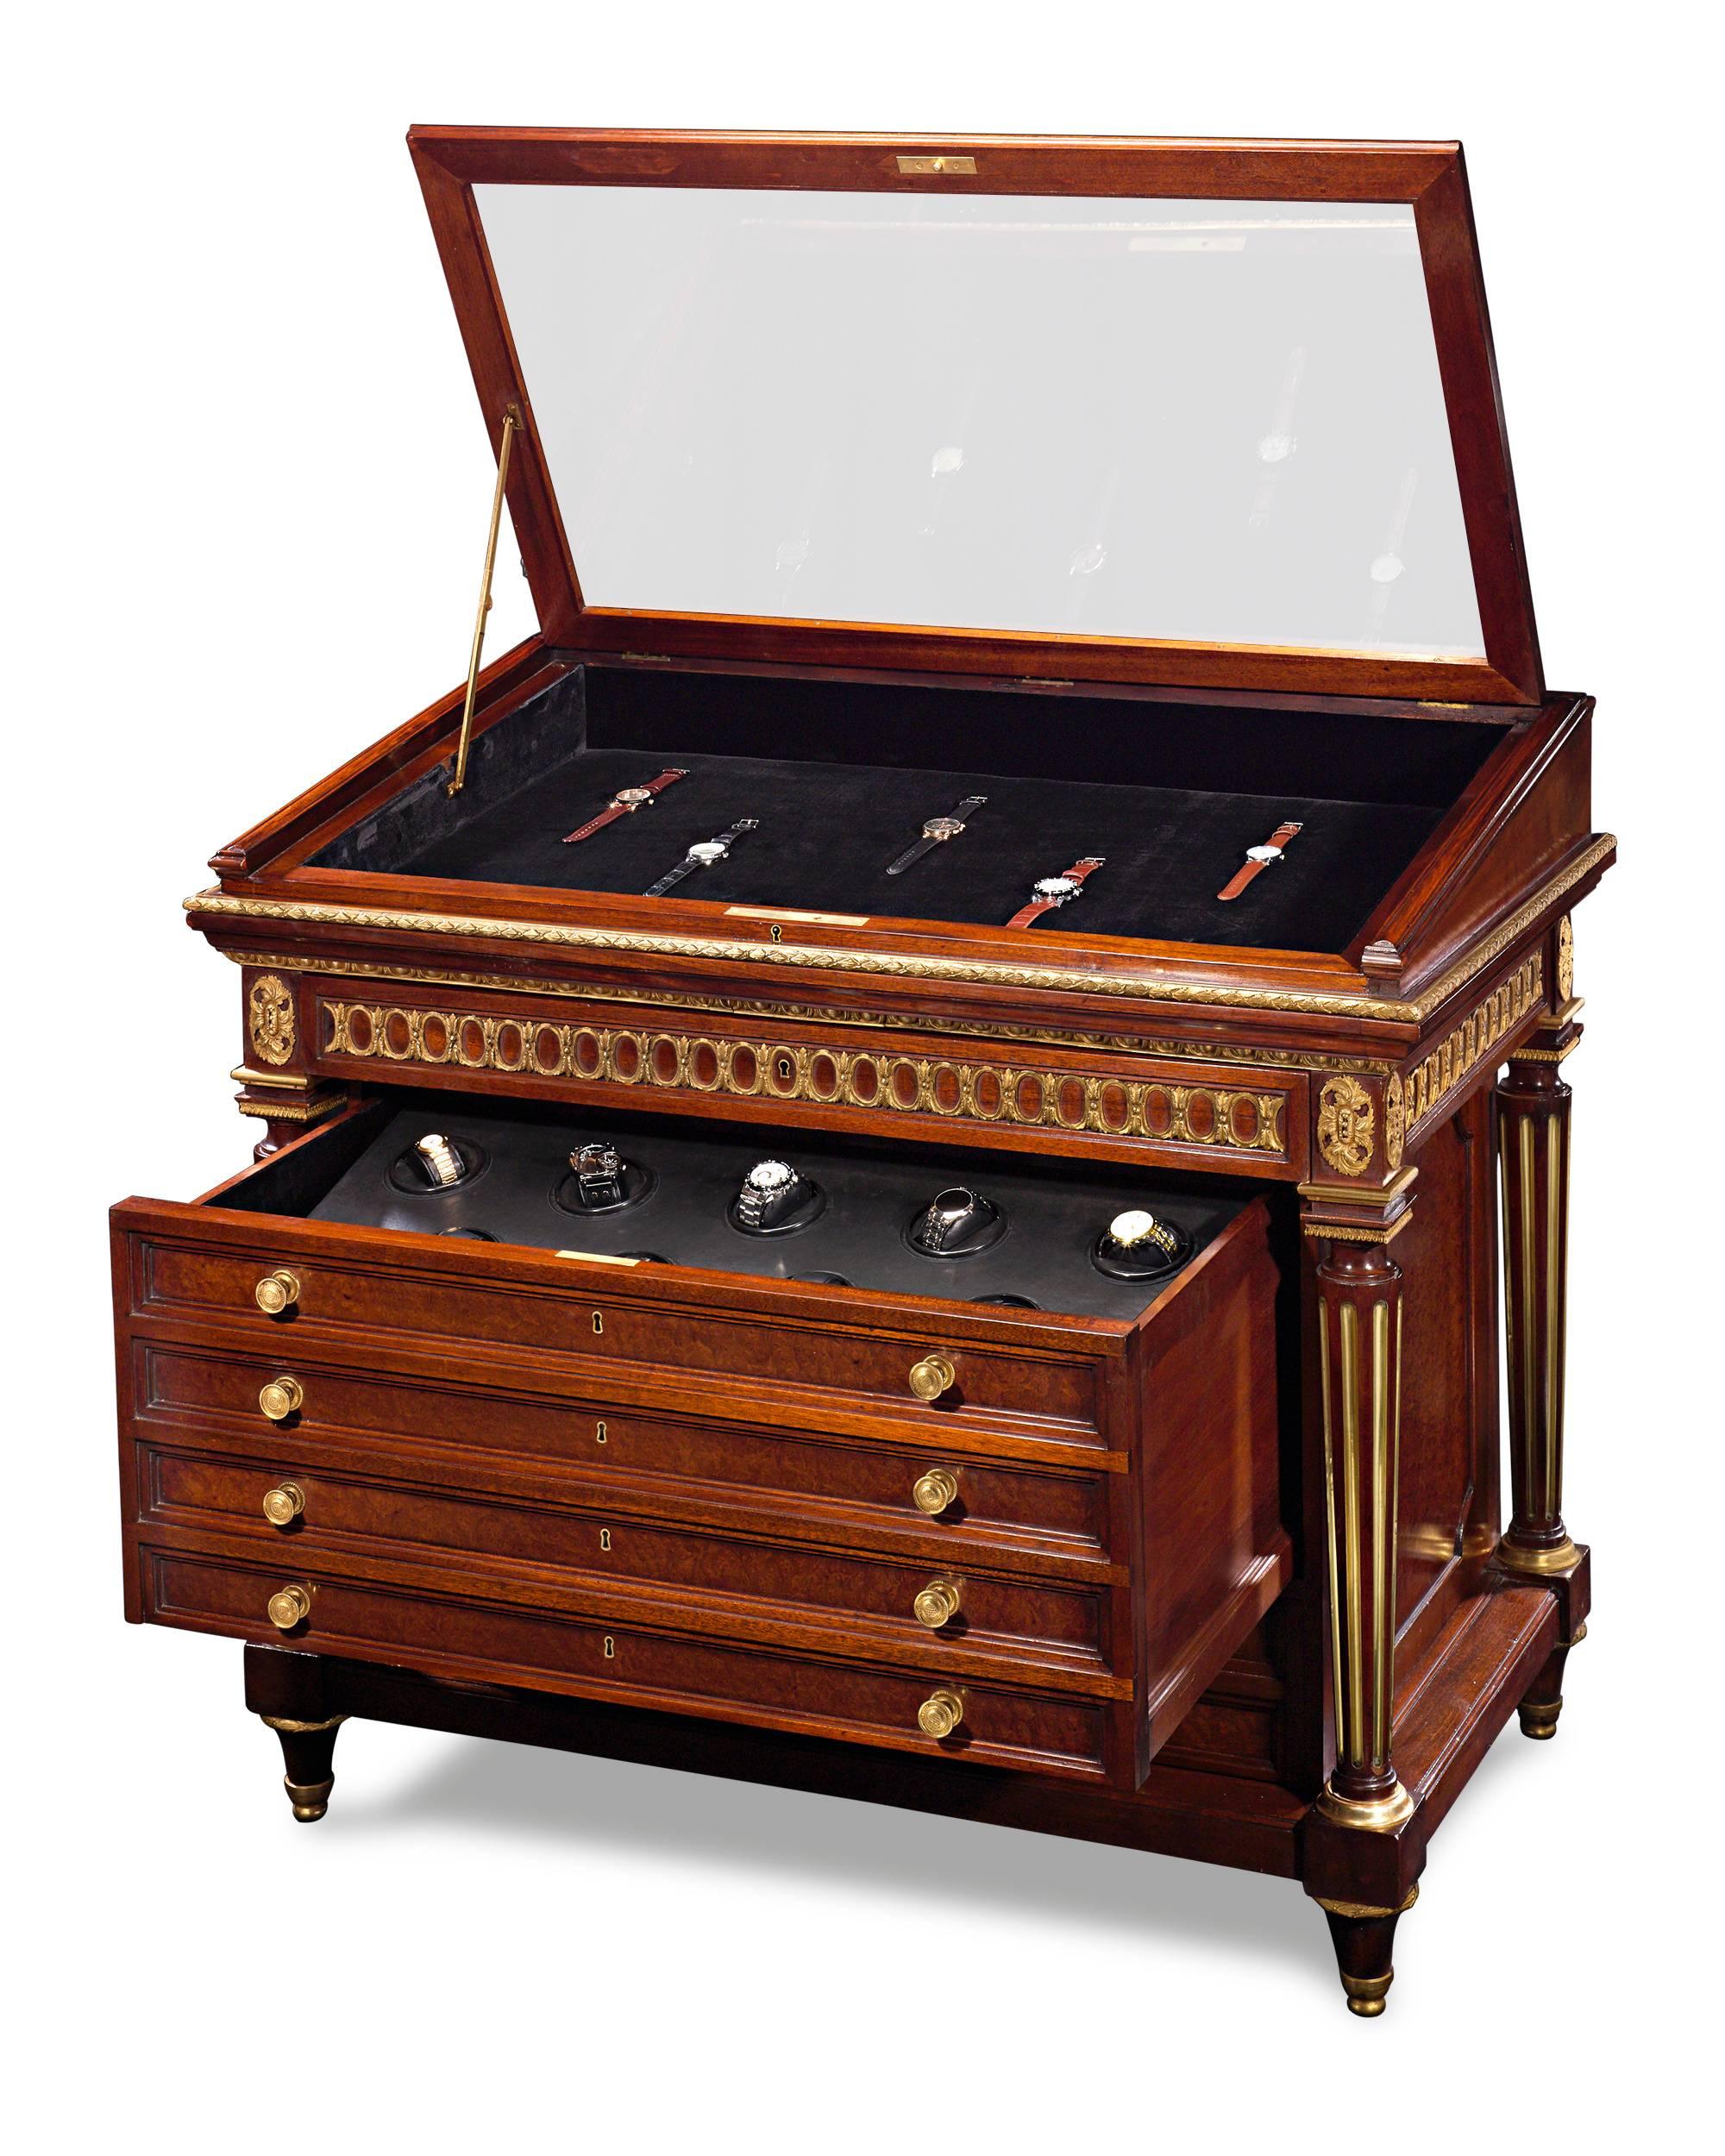 This incredible, one-of-a-kind watch display cabinet brings together the beauty of an antique with the functionality of modern technology. Crafted of mahogany, this 19th century jewelry display cabinet has been ingeniously retrofitted with an